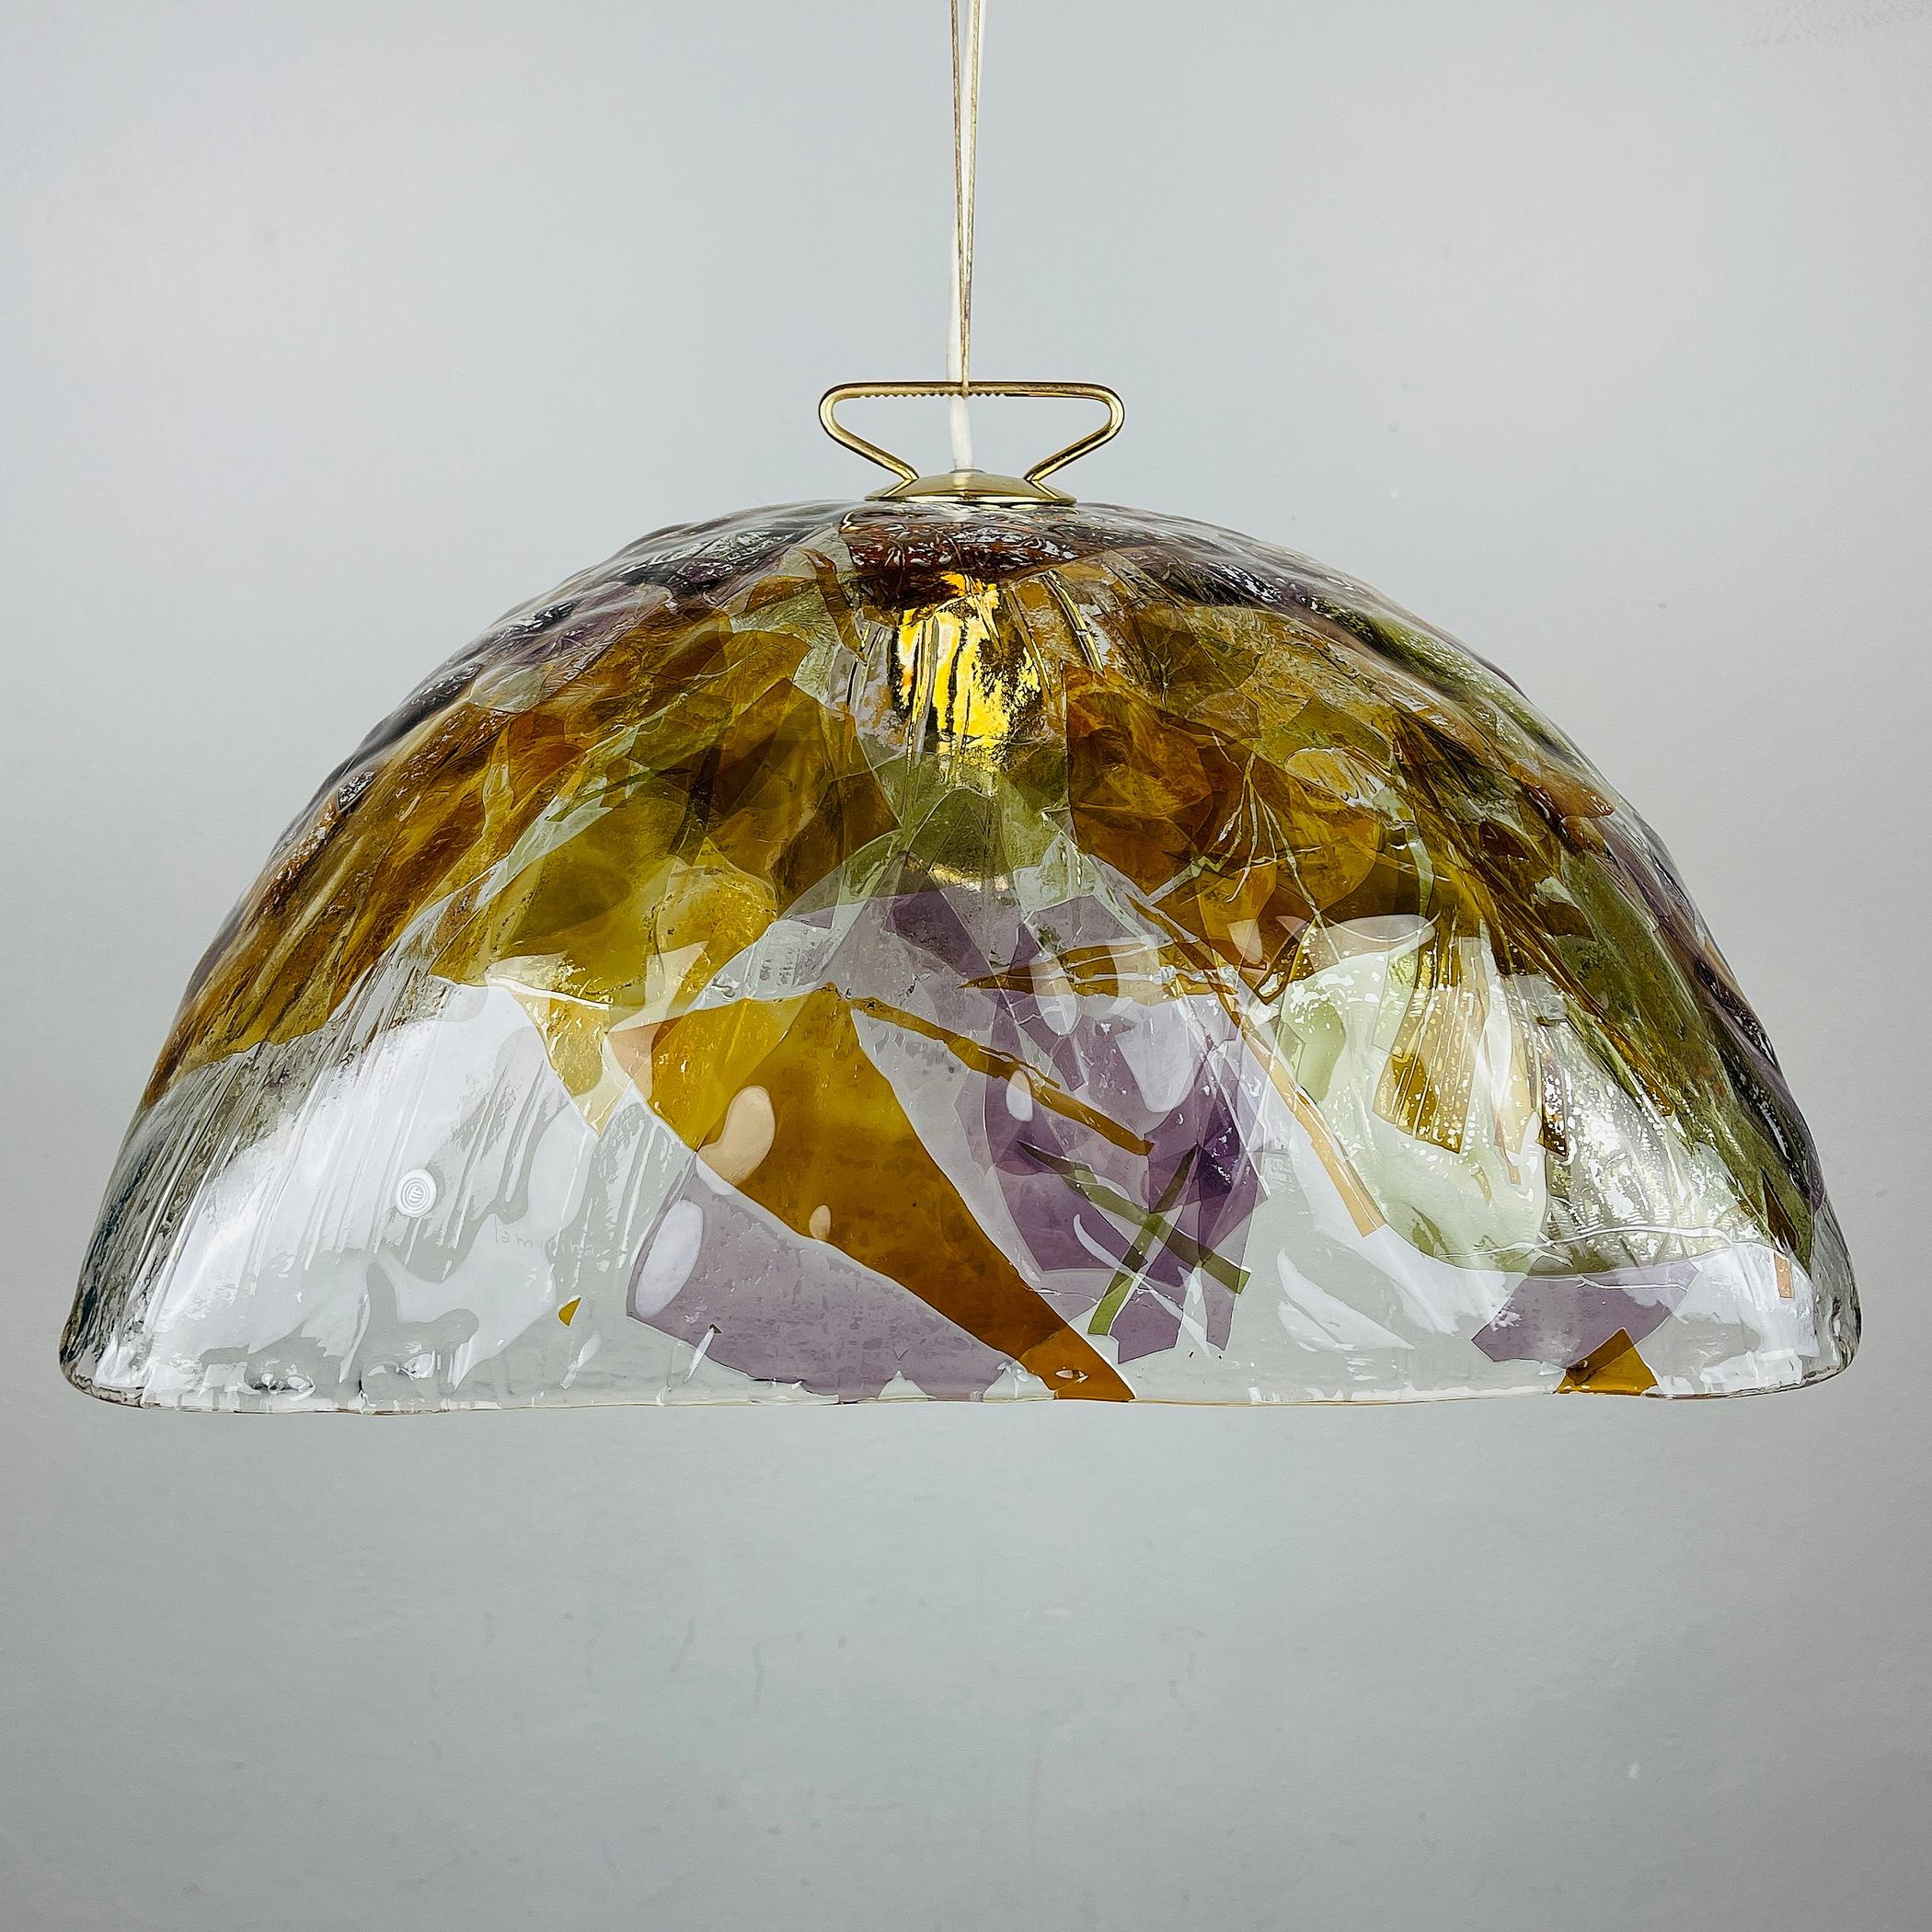 The beautiful vintage large murano pendant lamp by manufacture 